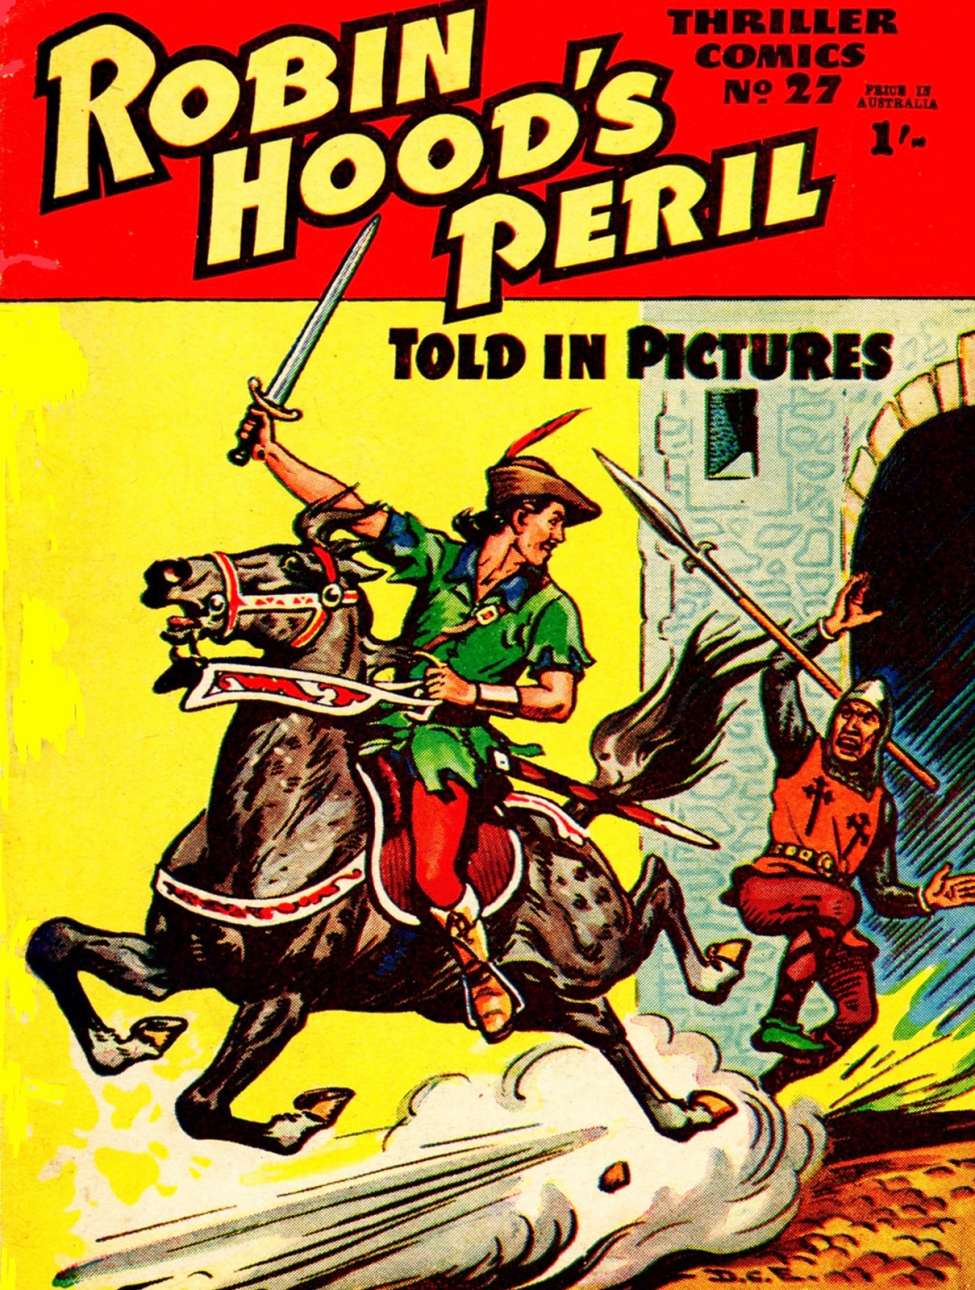 Book Cover For Thriller Comics 27 - Robin Hood's Peril